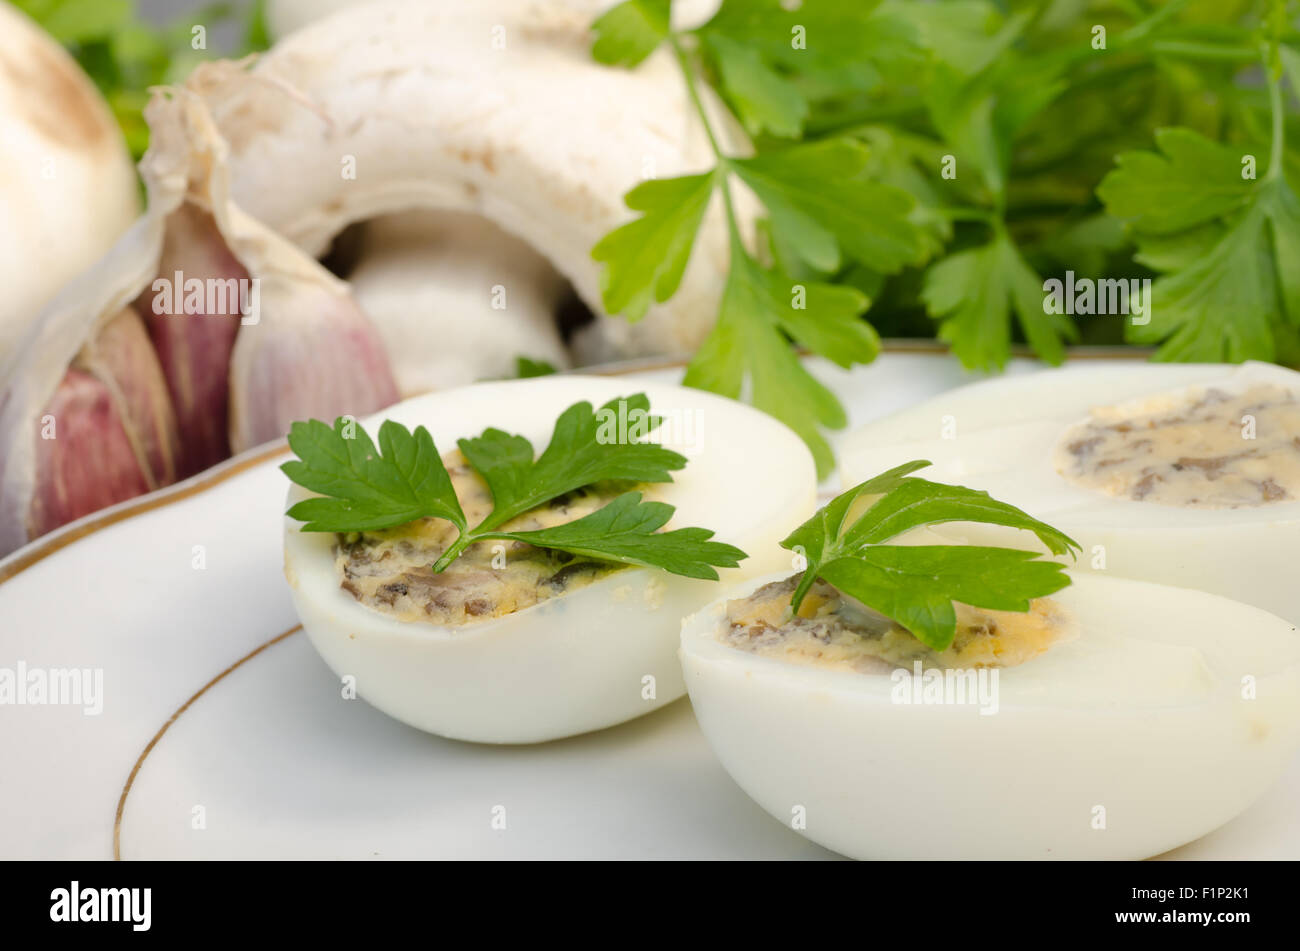 Oeufs farcis au persil on white plate Banque D'Images